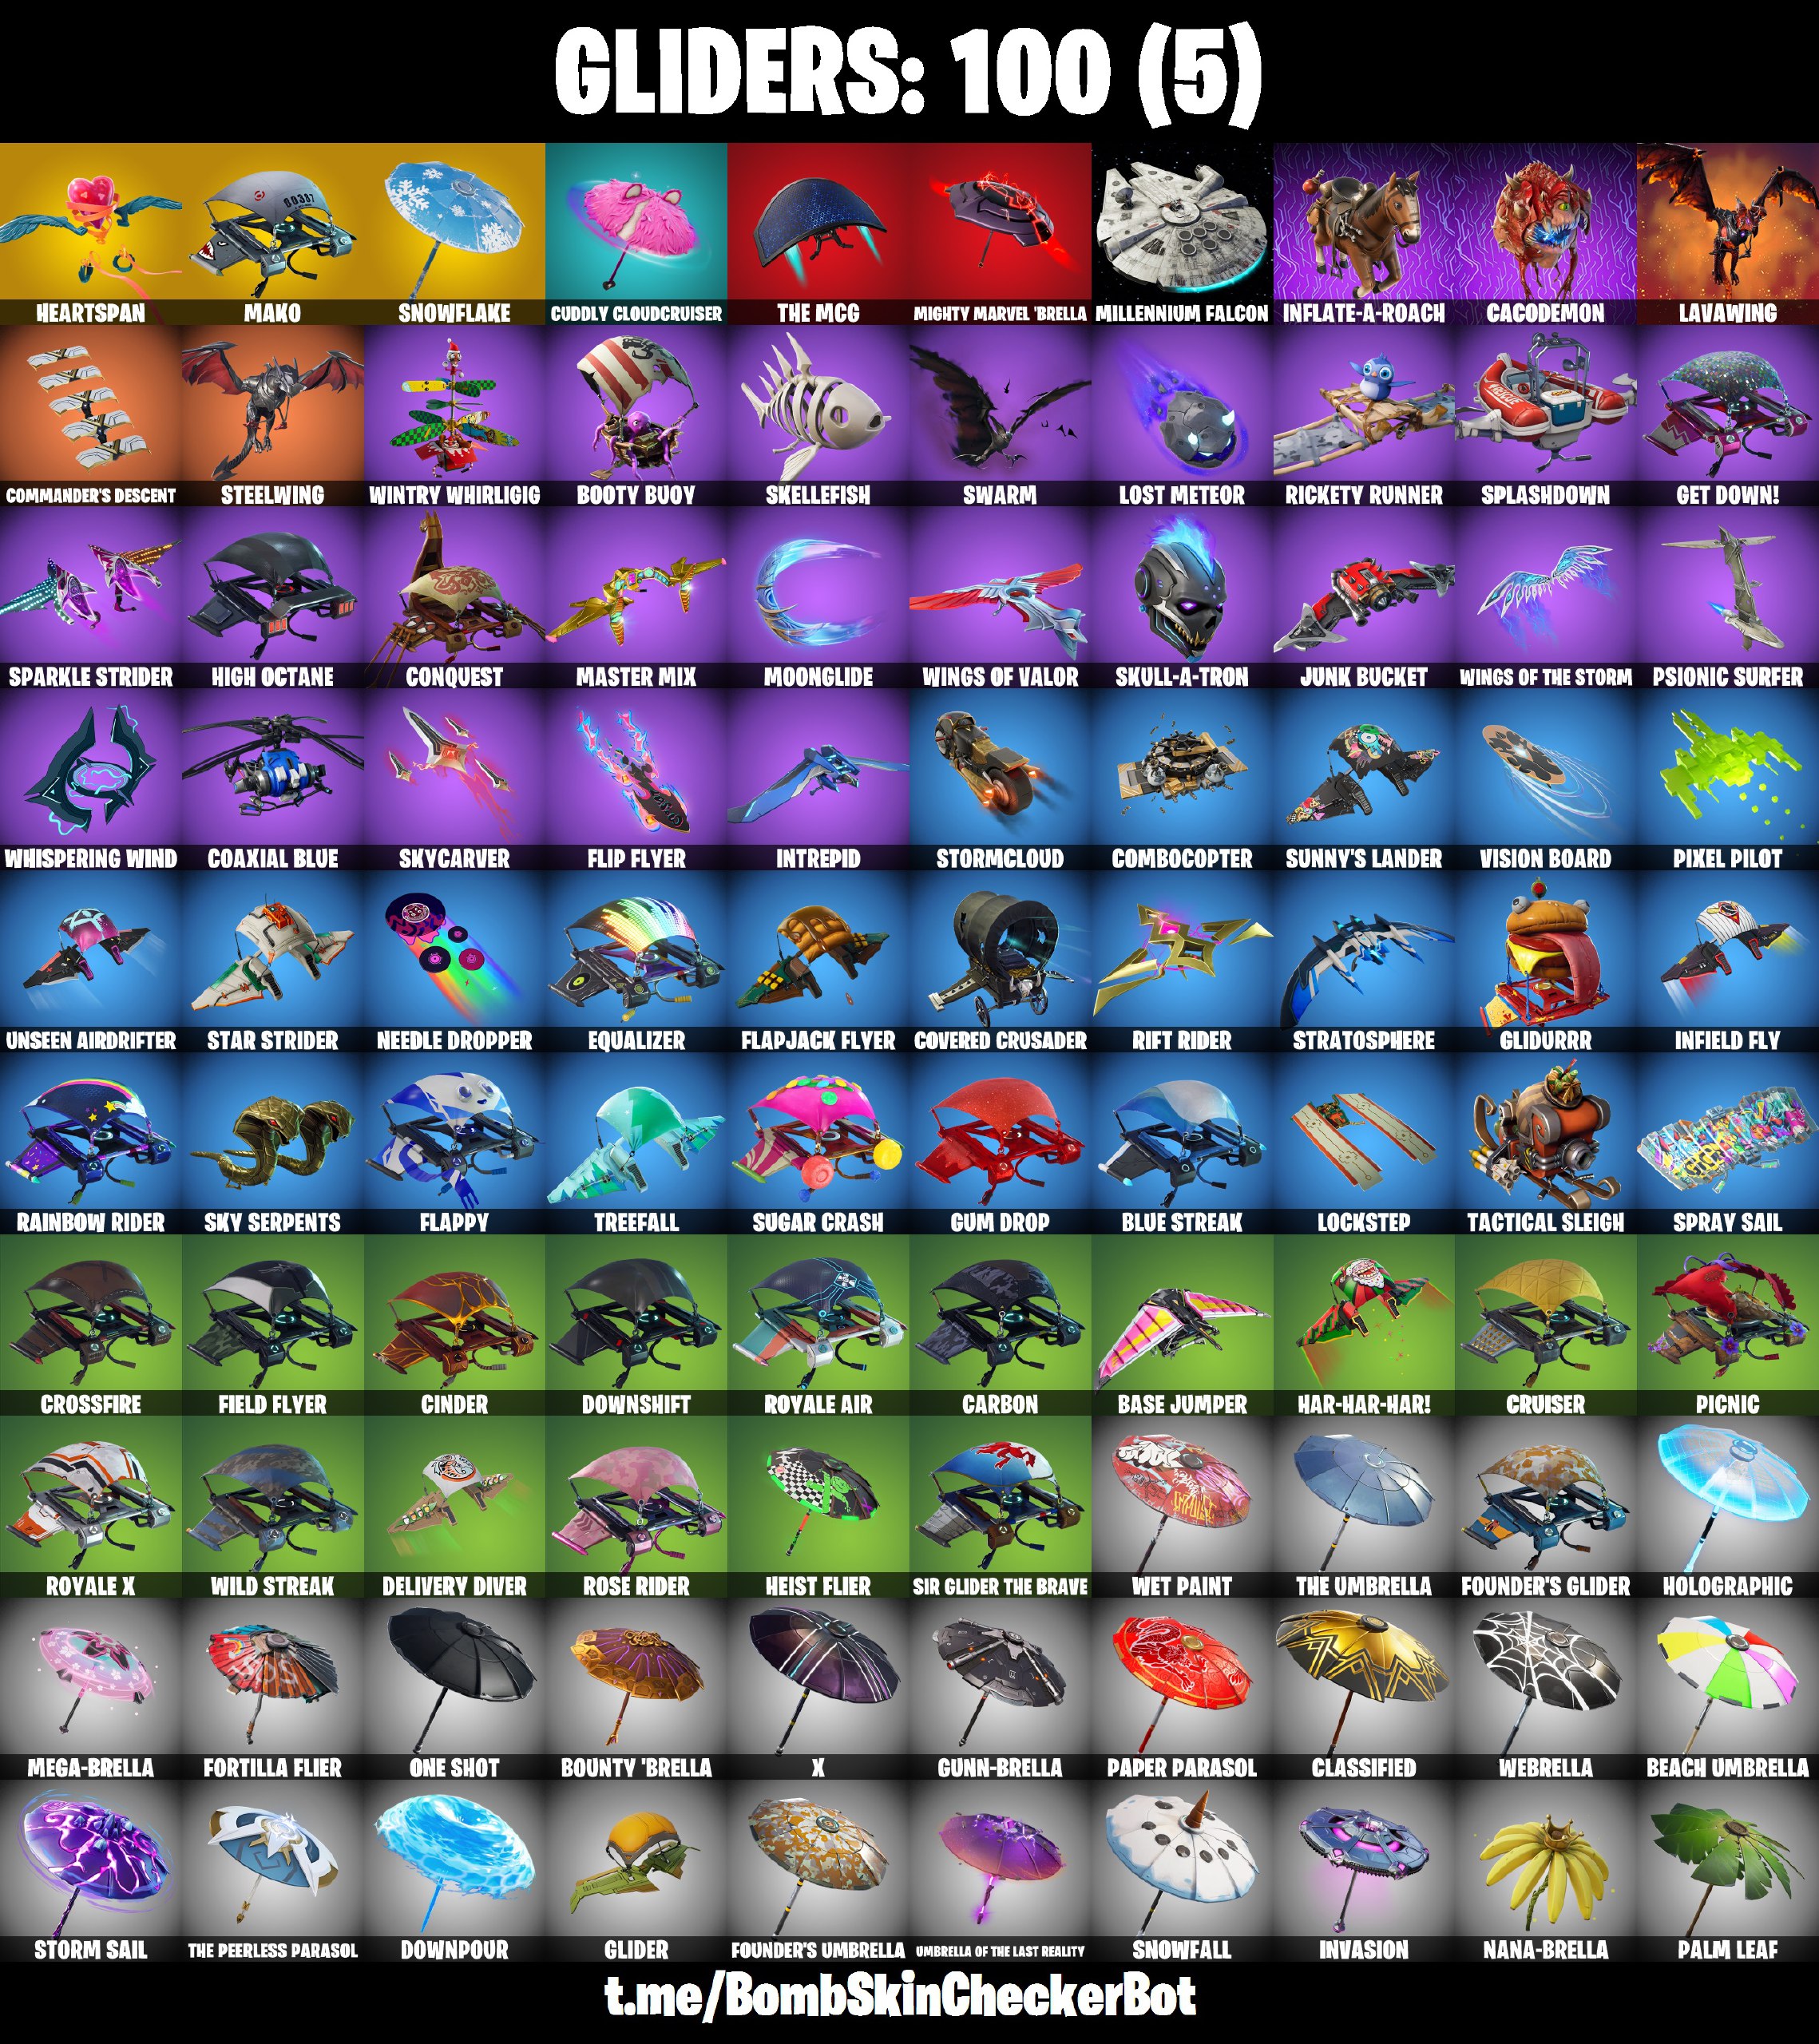 FA | [PC] / 132 SKINS / STW / Black Knight+The Reaper+Mako+Floss+Glow+Prodigy+Trilogy+Omega Max / INSTANT DELIVERY+WARRENTY